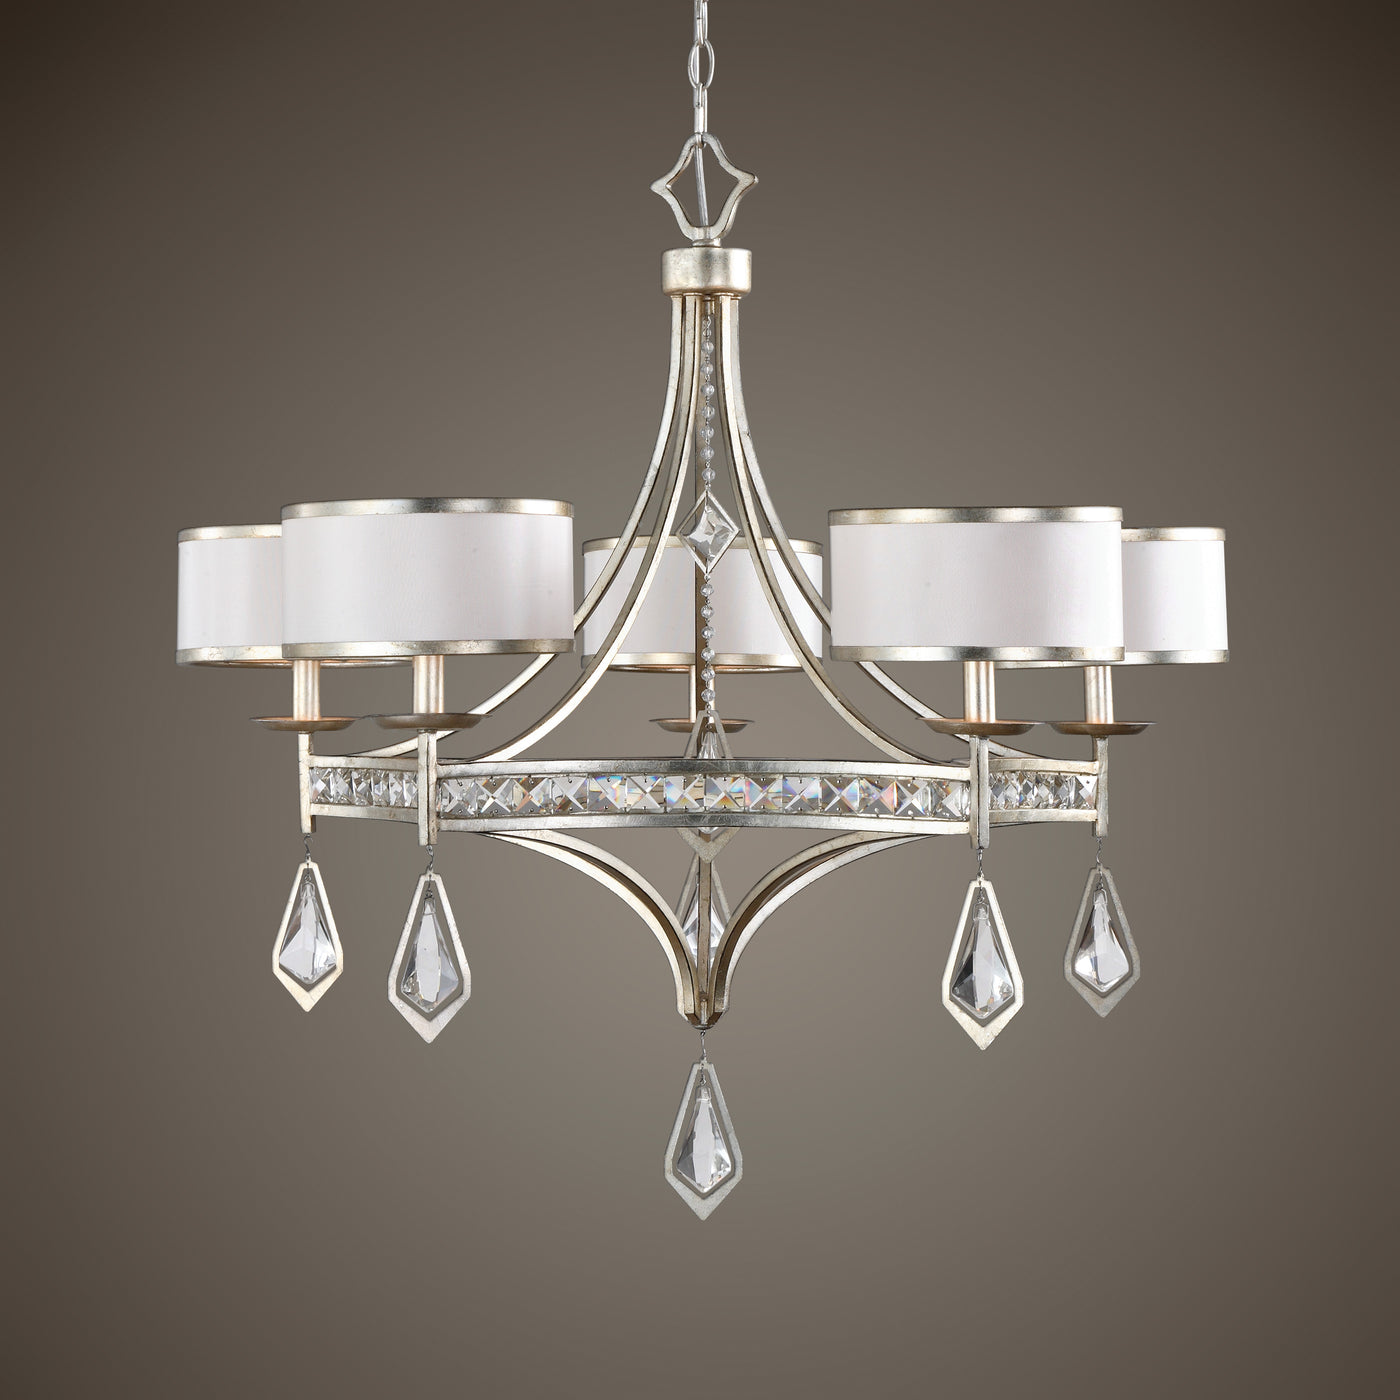 Burnished Silver Champagne Leaf Finish With Modern Clear Crystal Accents Highlight This Majestic Chandelier Along With Sil...